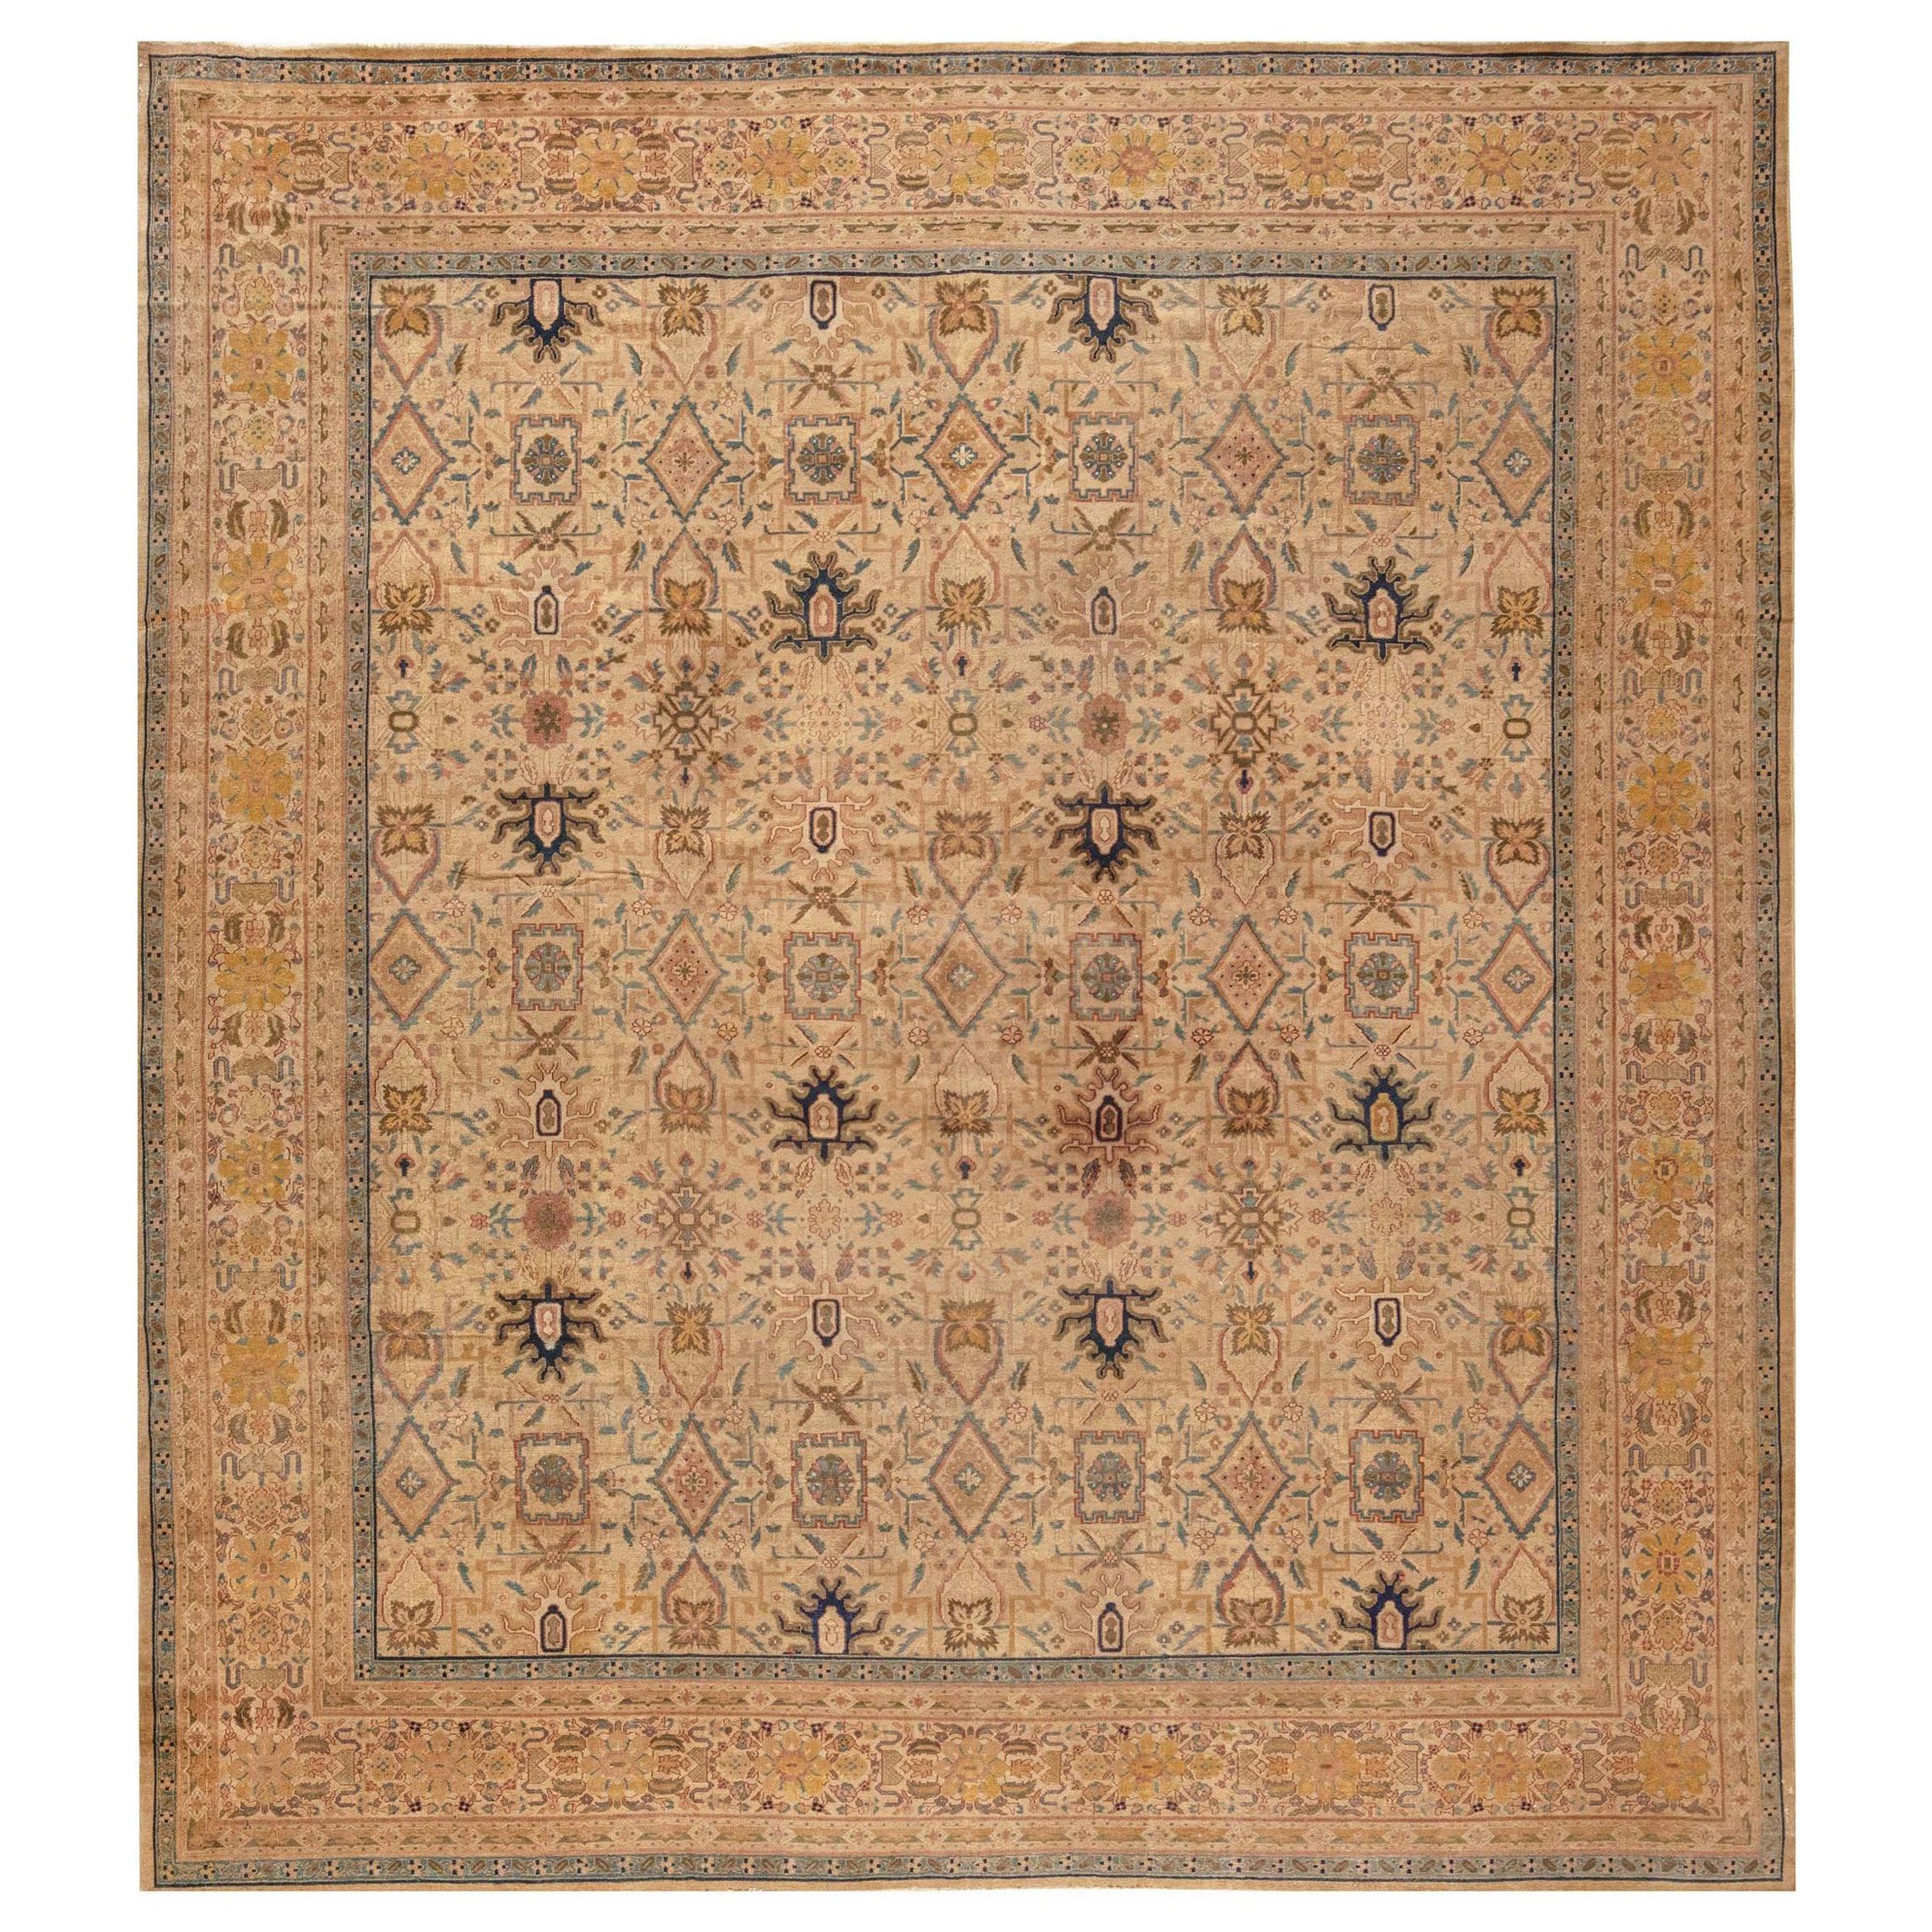 Authentic Early 20th Century Turkish Hereke Rug For Sale